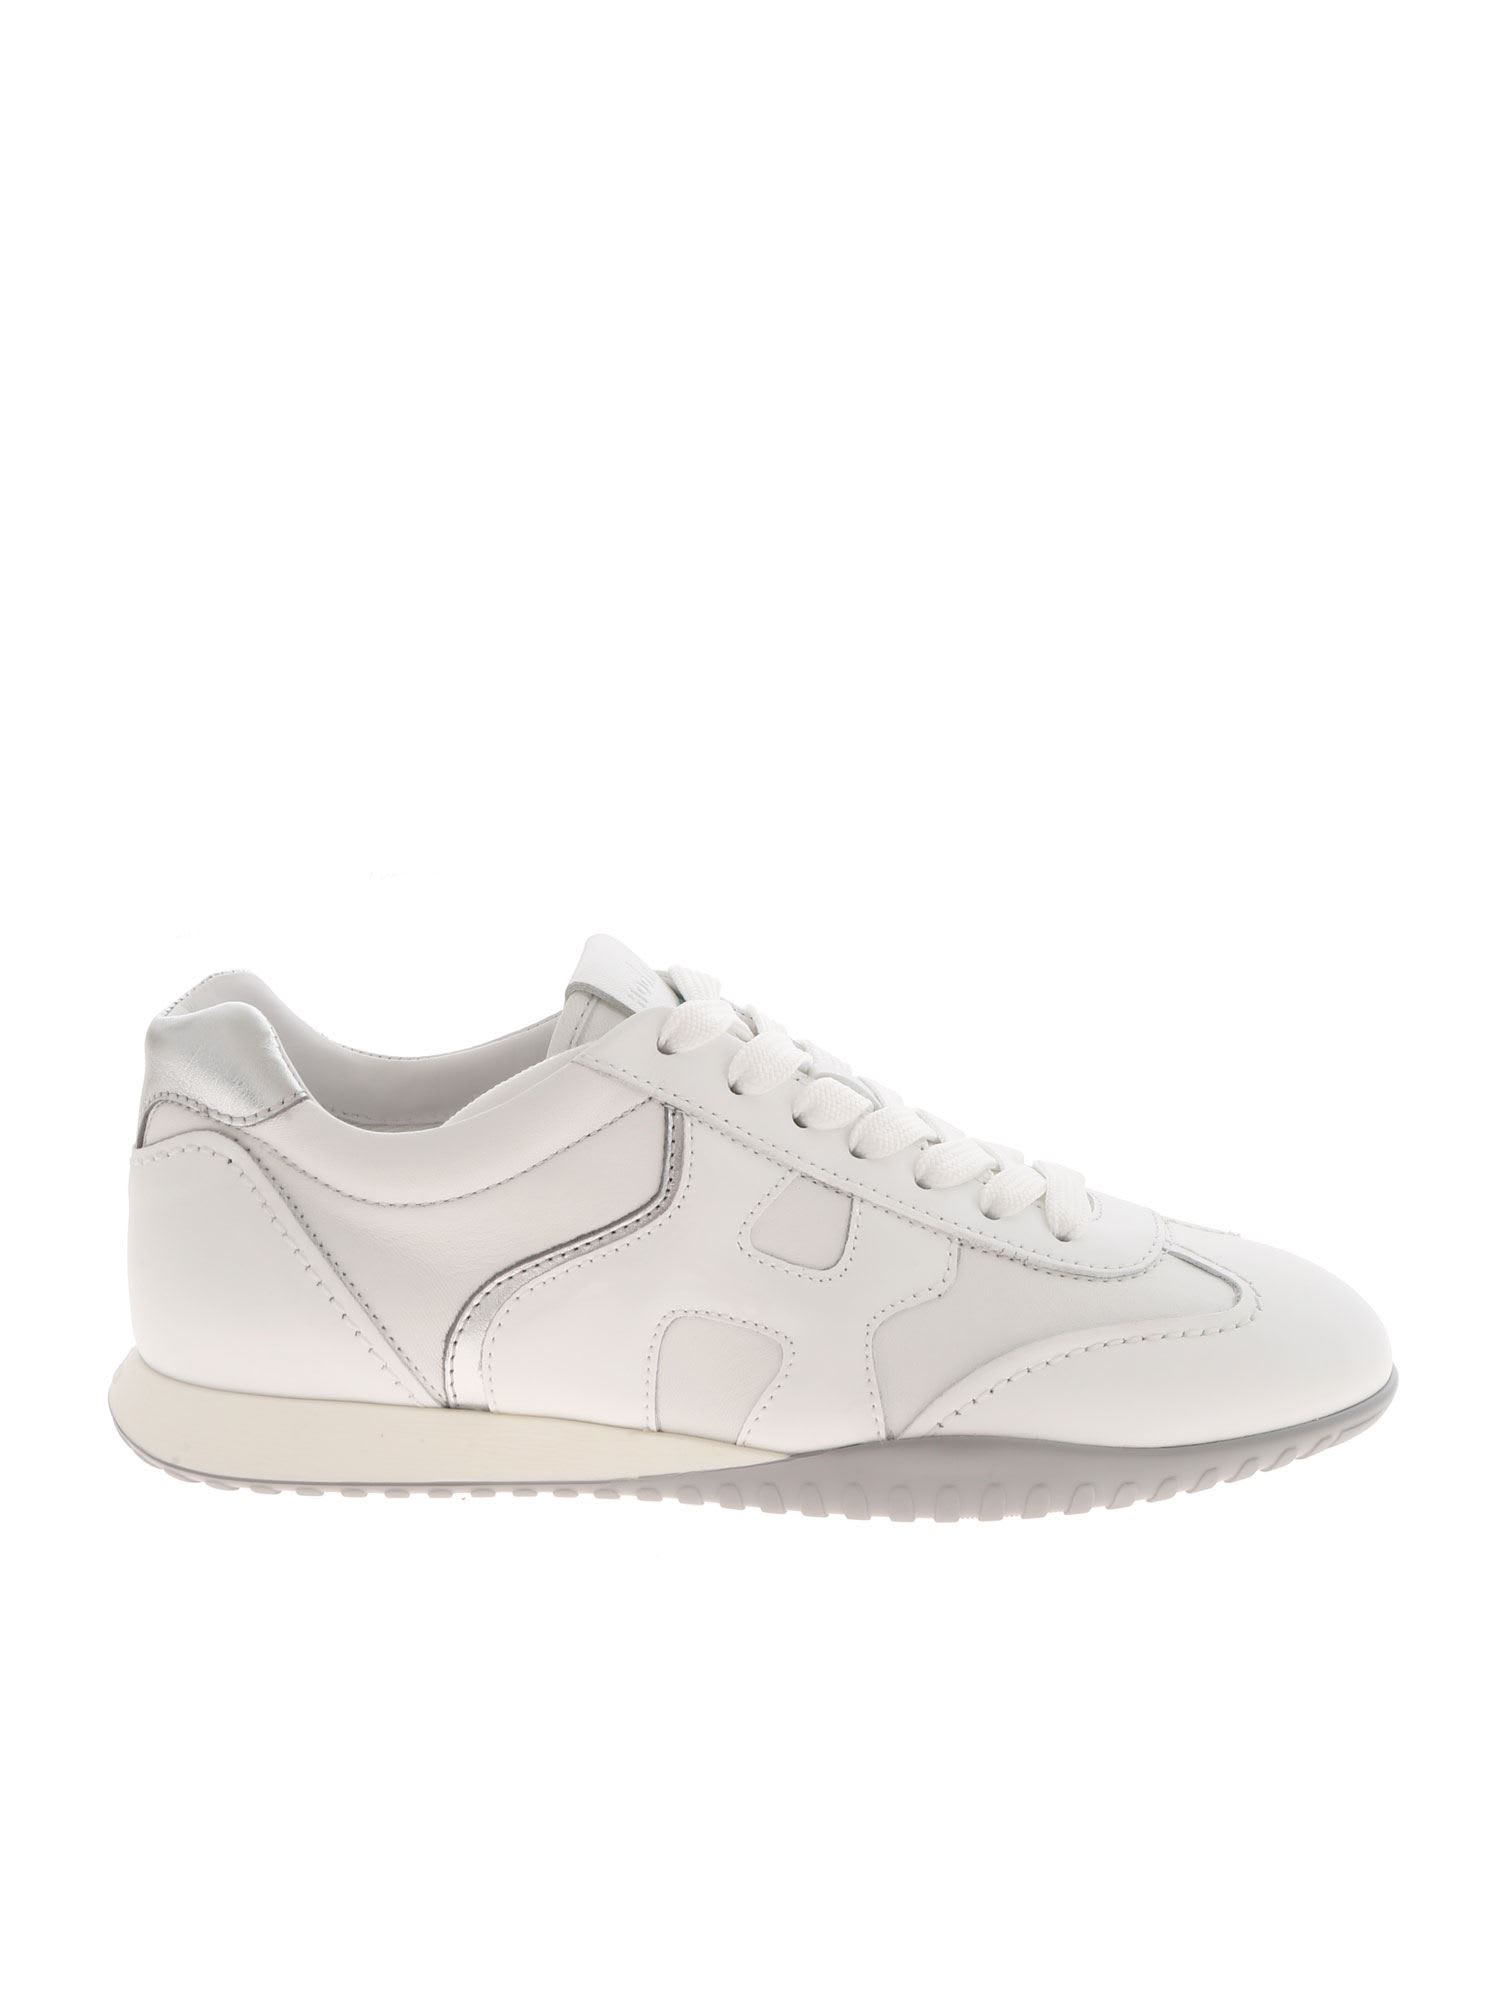 Hogan Olympia z Sneakers In White Leather